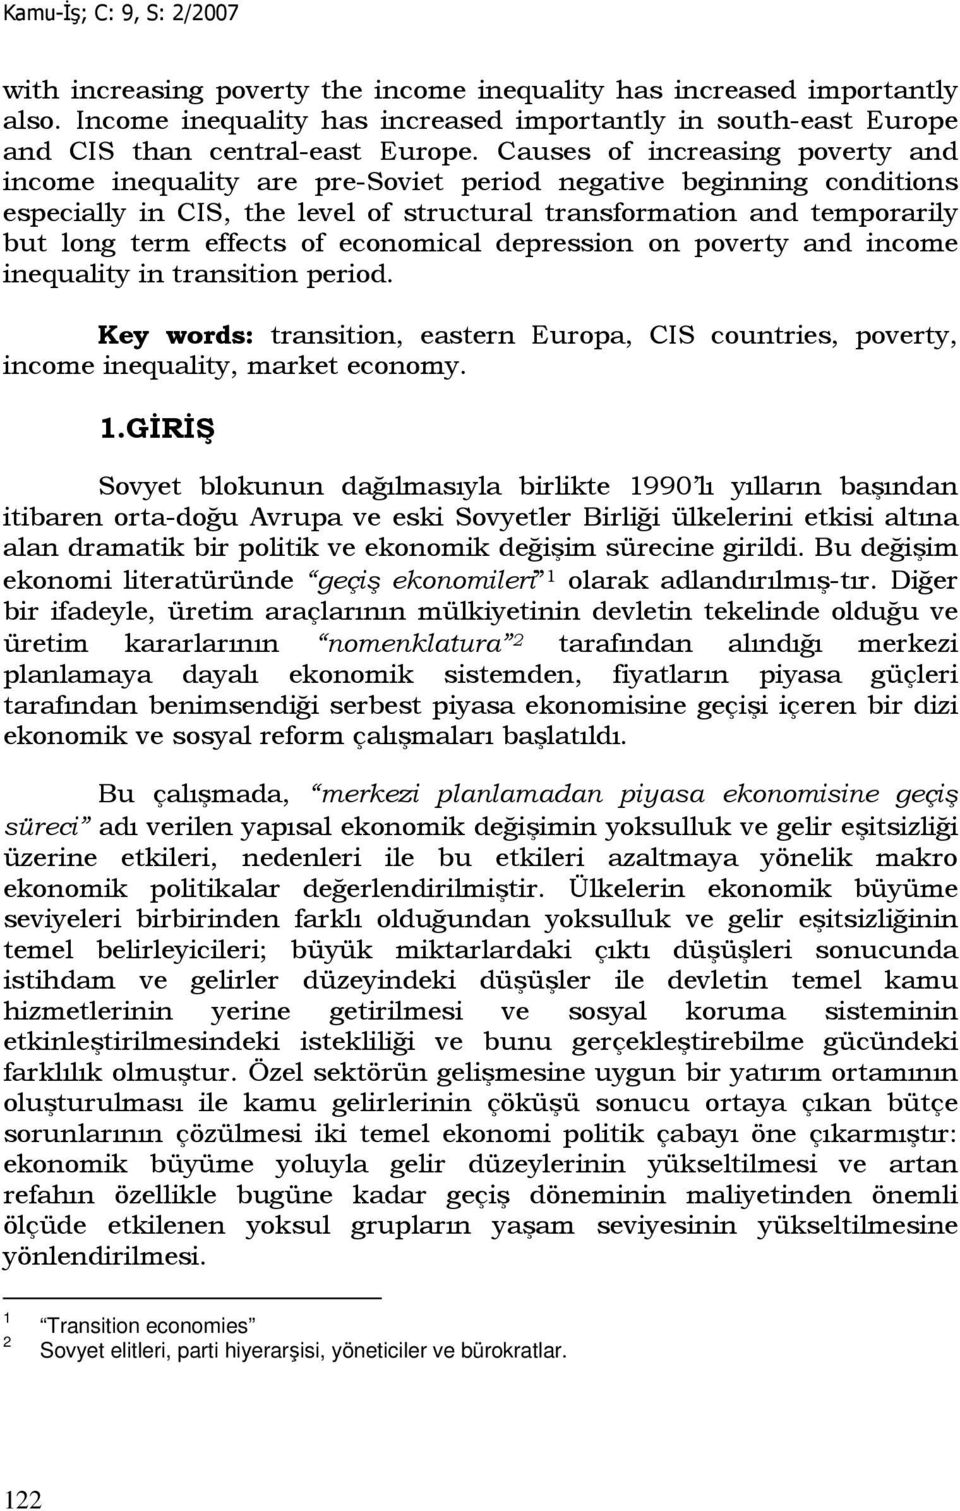 of economical depression on poverty and income inequality in transition period. Key words: transition, eastern Europa, CIS countries, poverty, income inequality, market economy. 1.